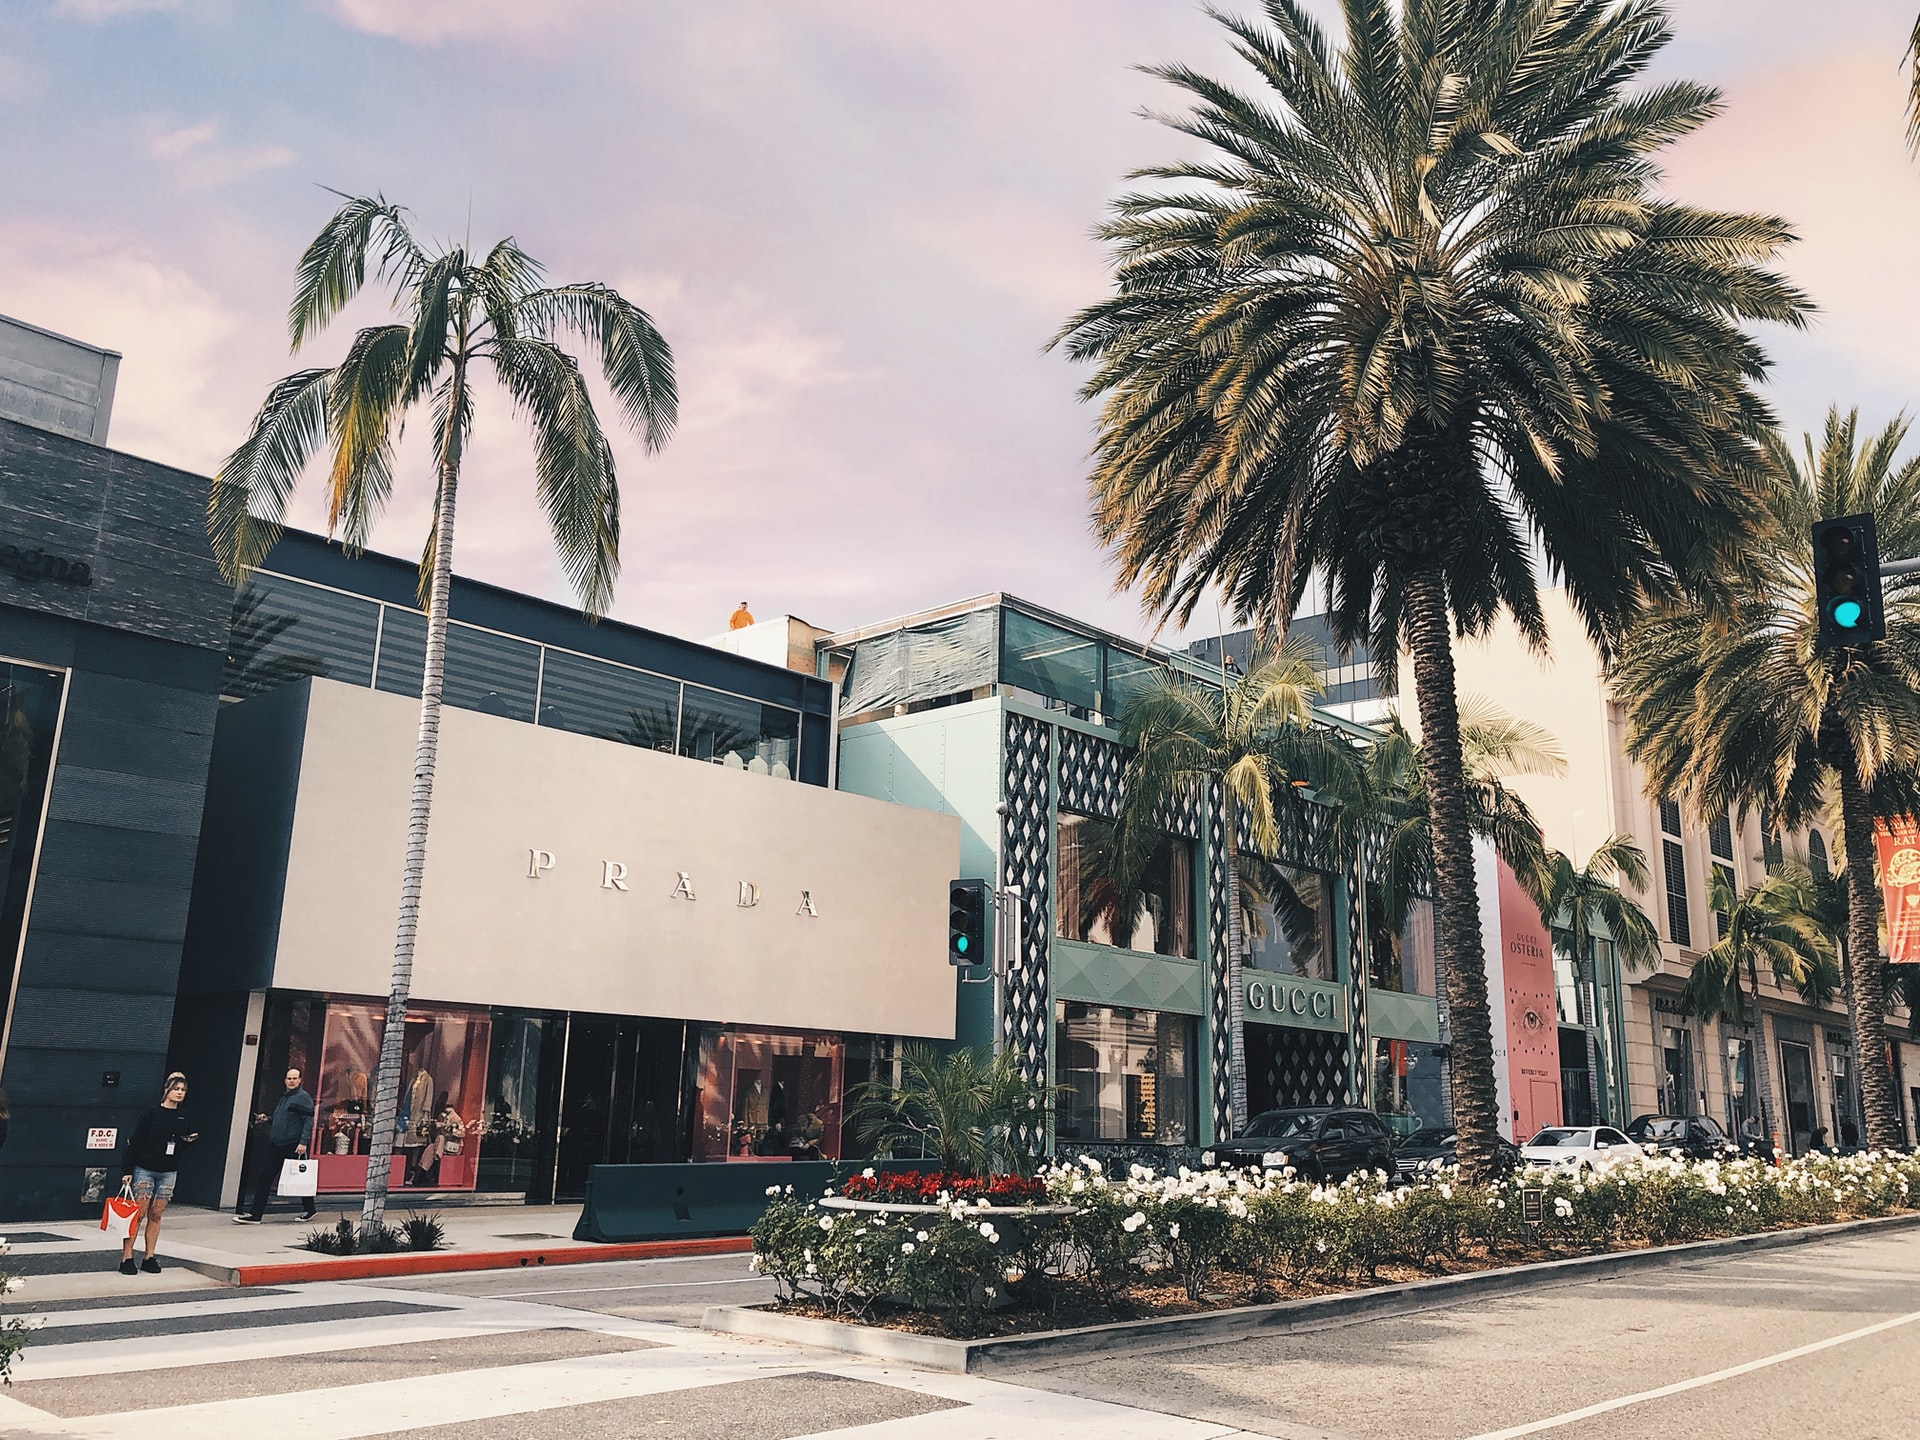 Rodeo Drive, Beverly Hills, California, Rodeo Drive is a tw…